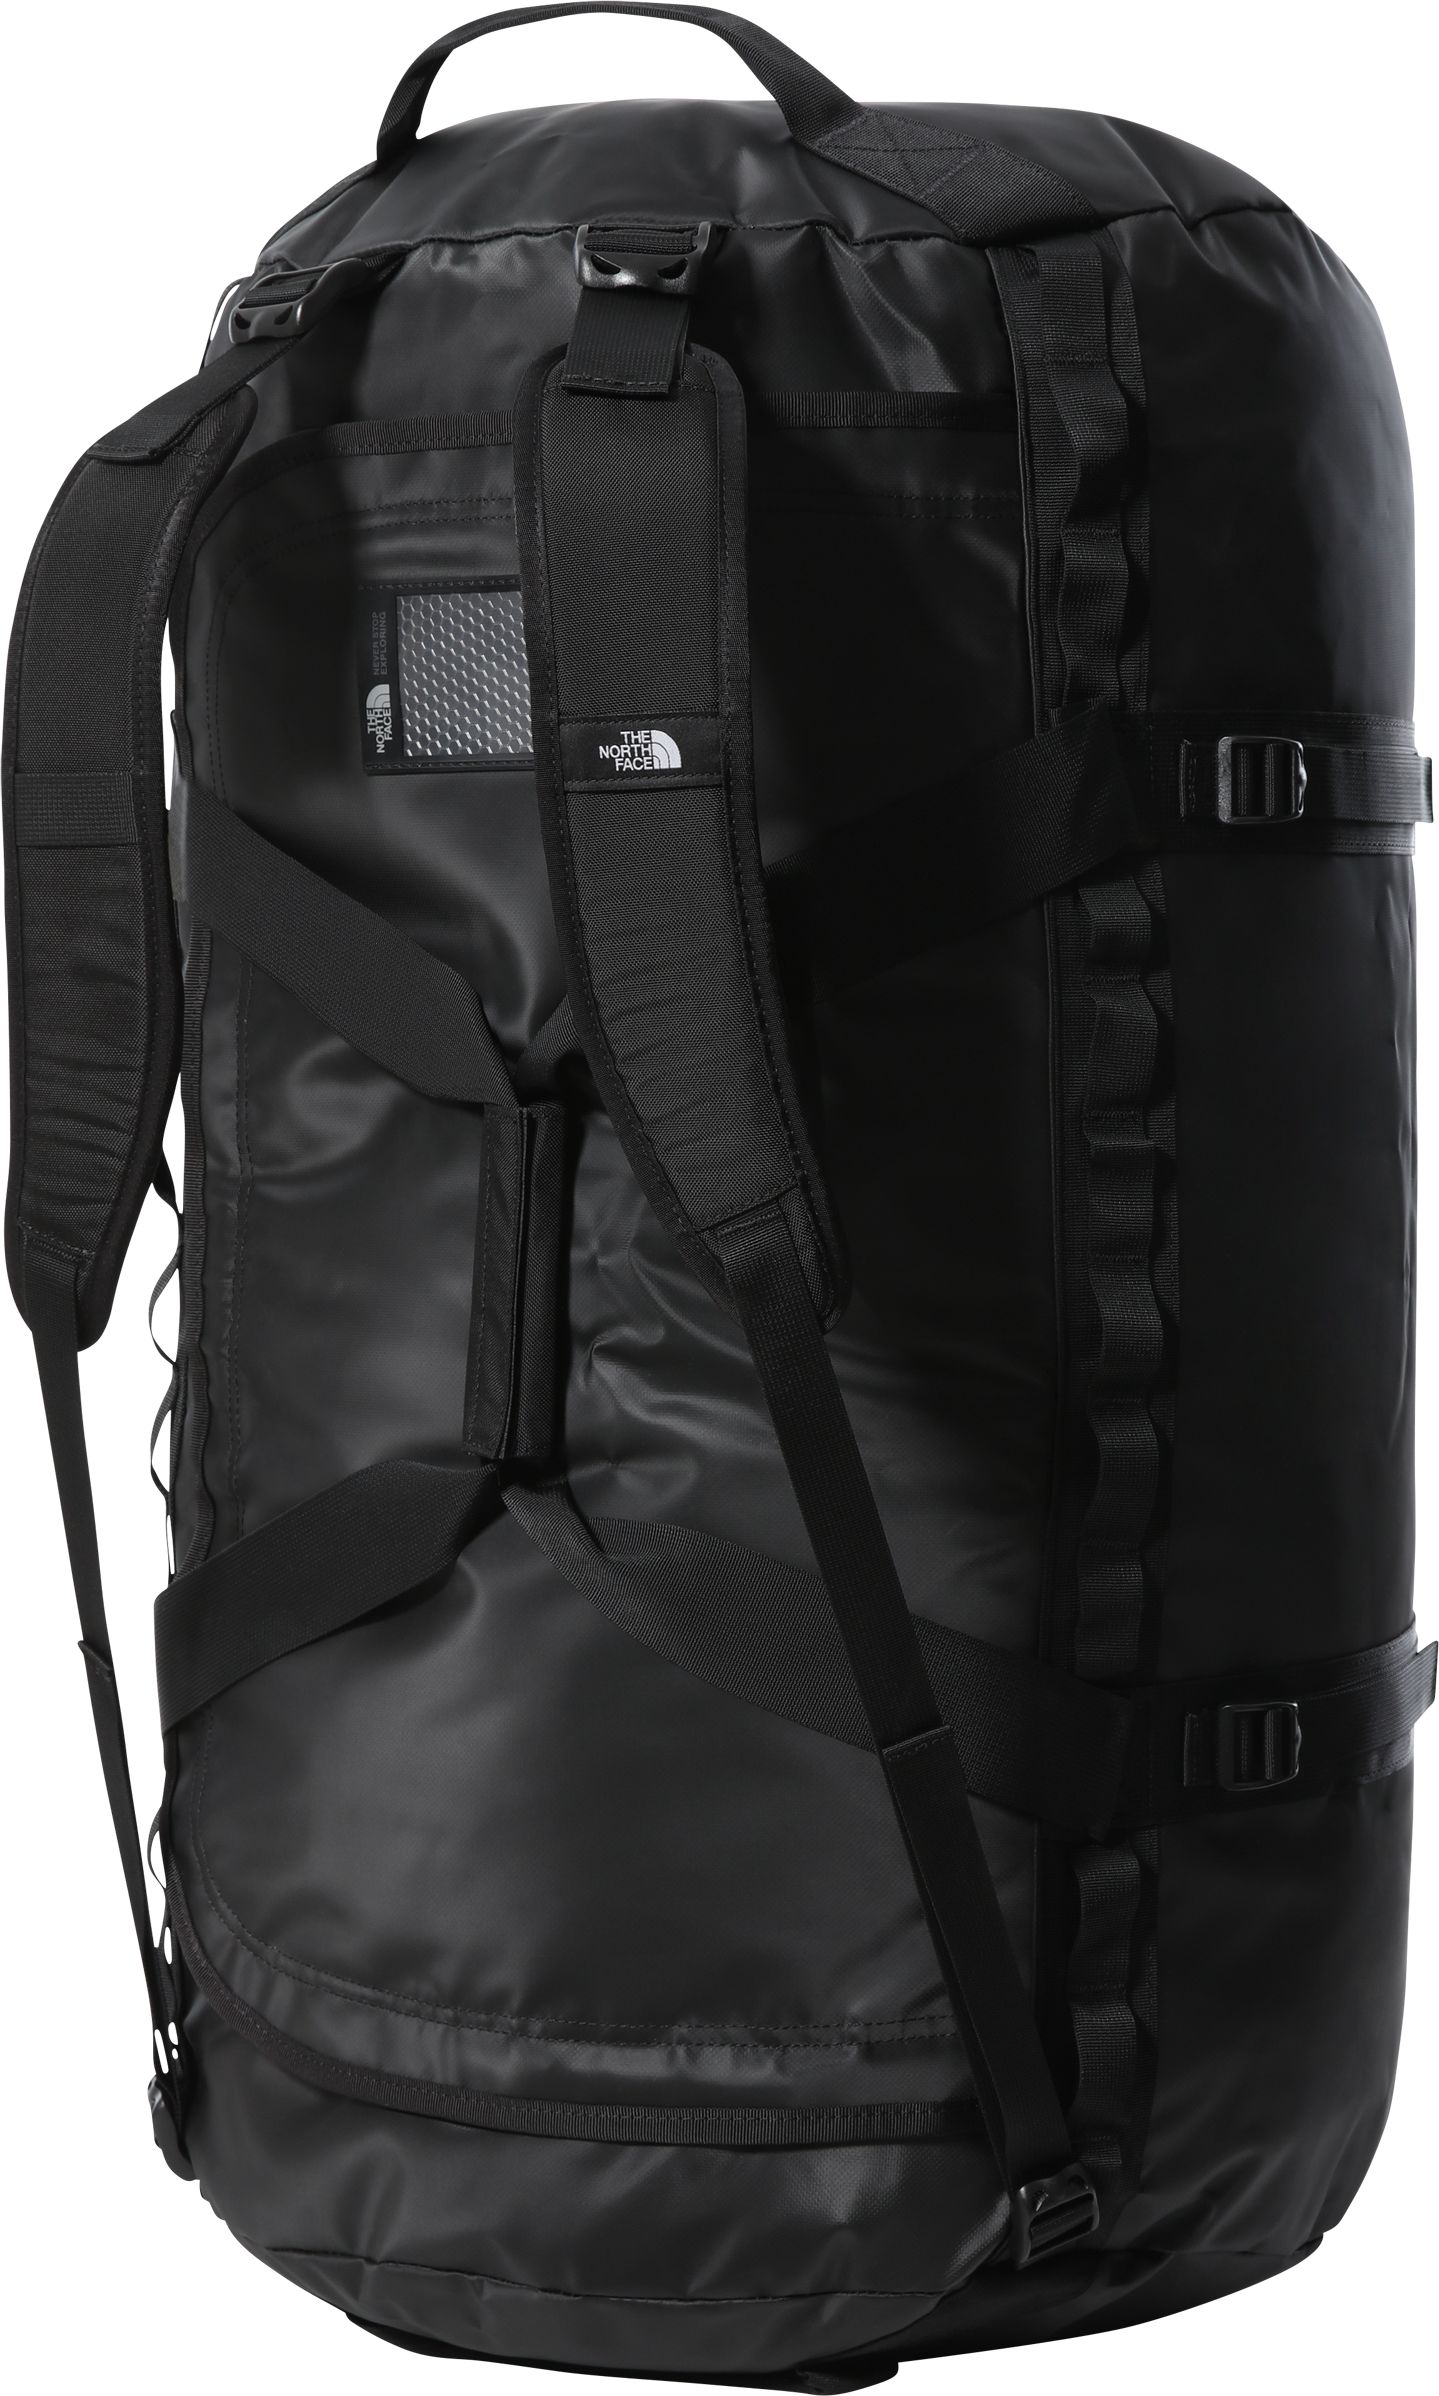 THE NORTH FACE, BASE CAMP DUFFEL XL